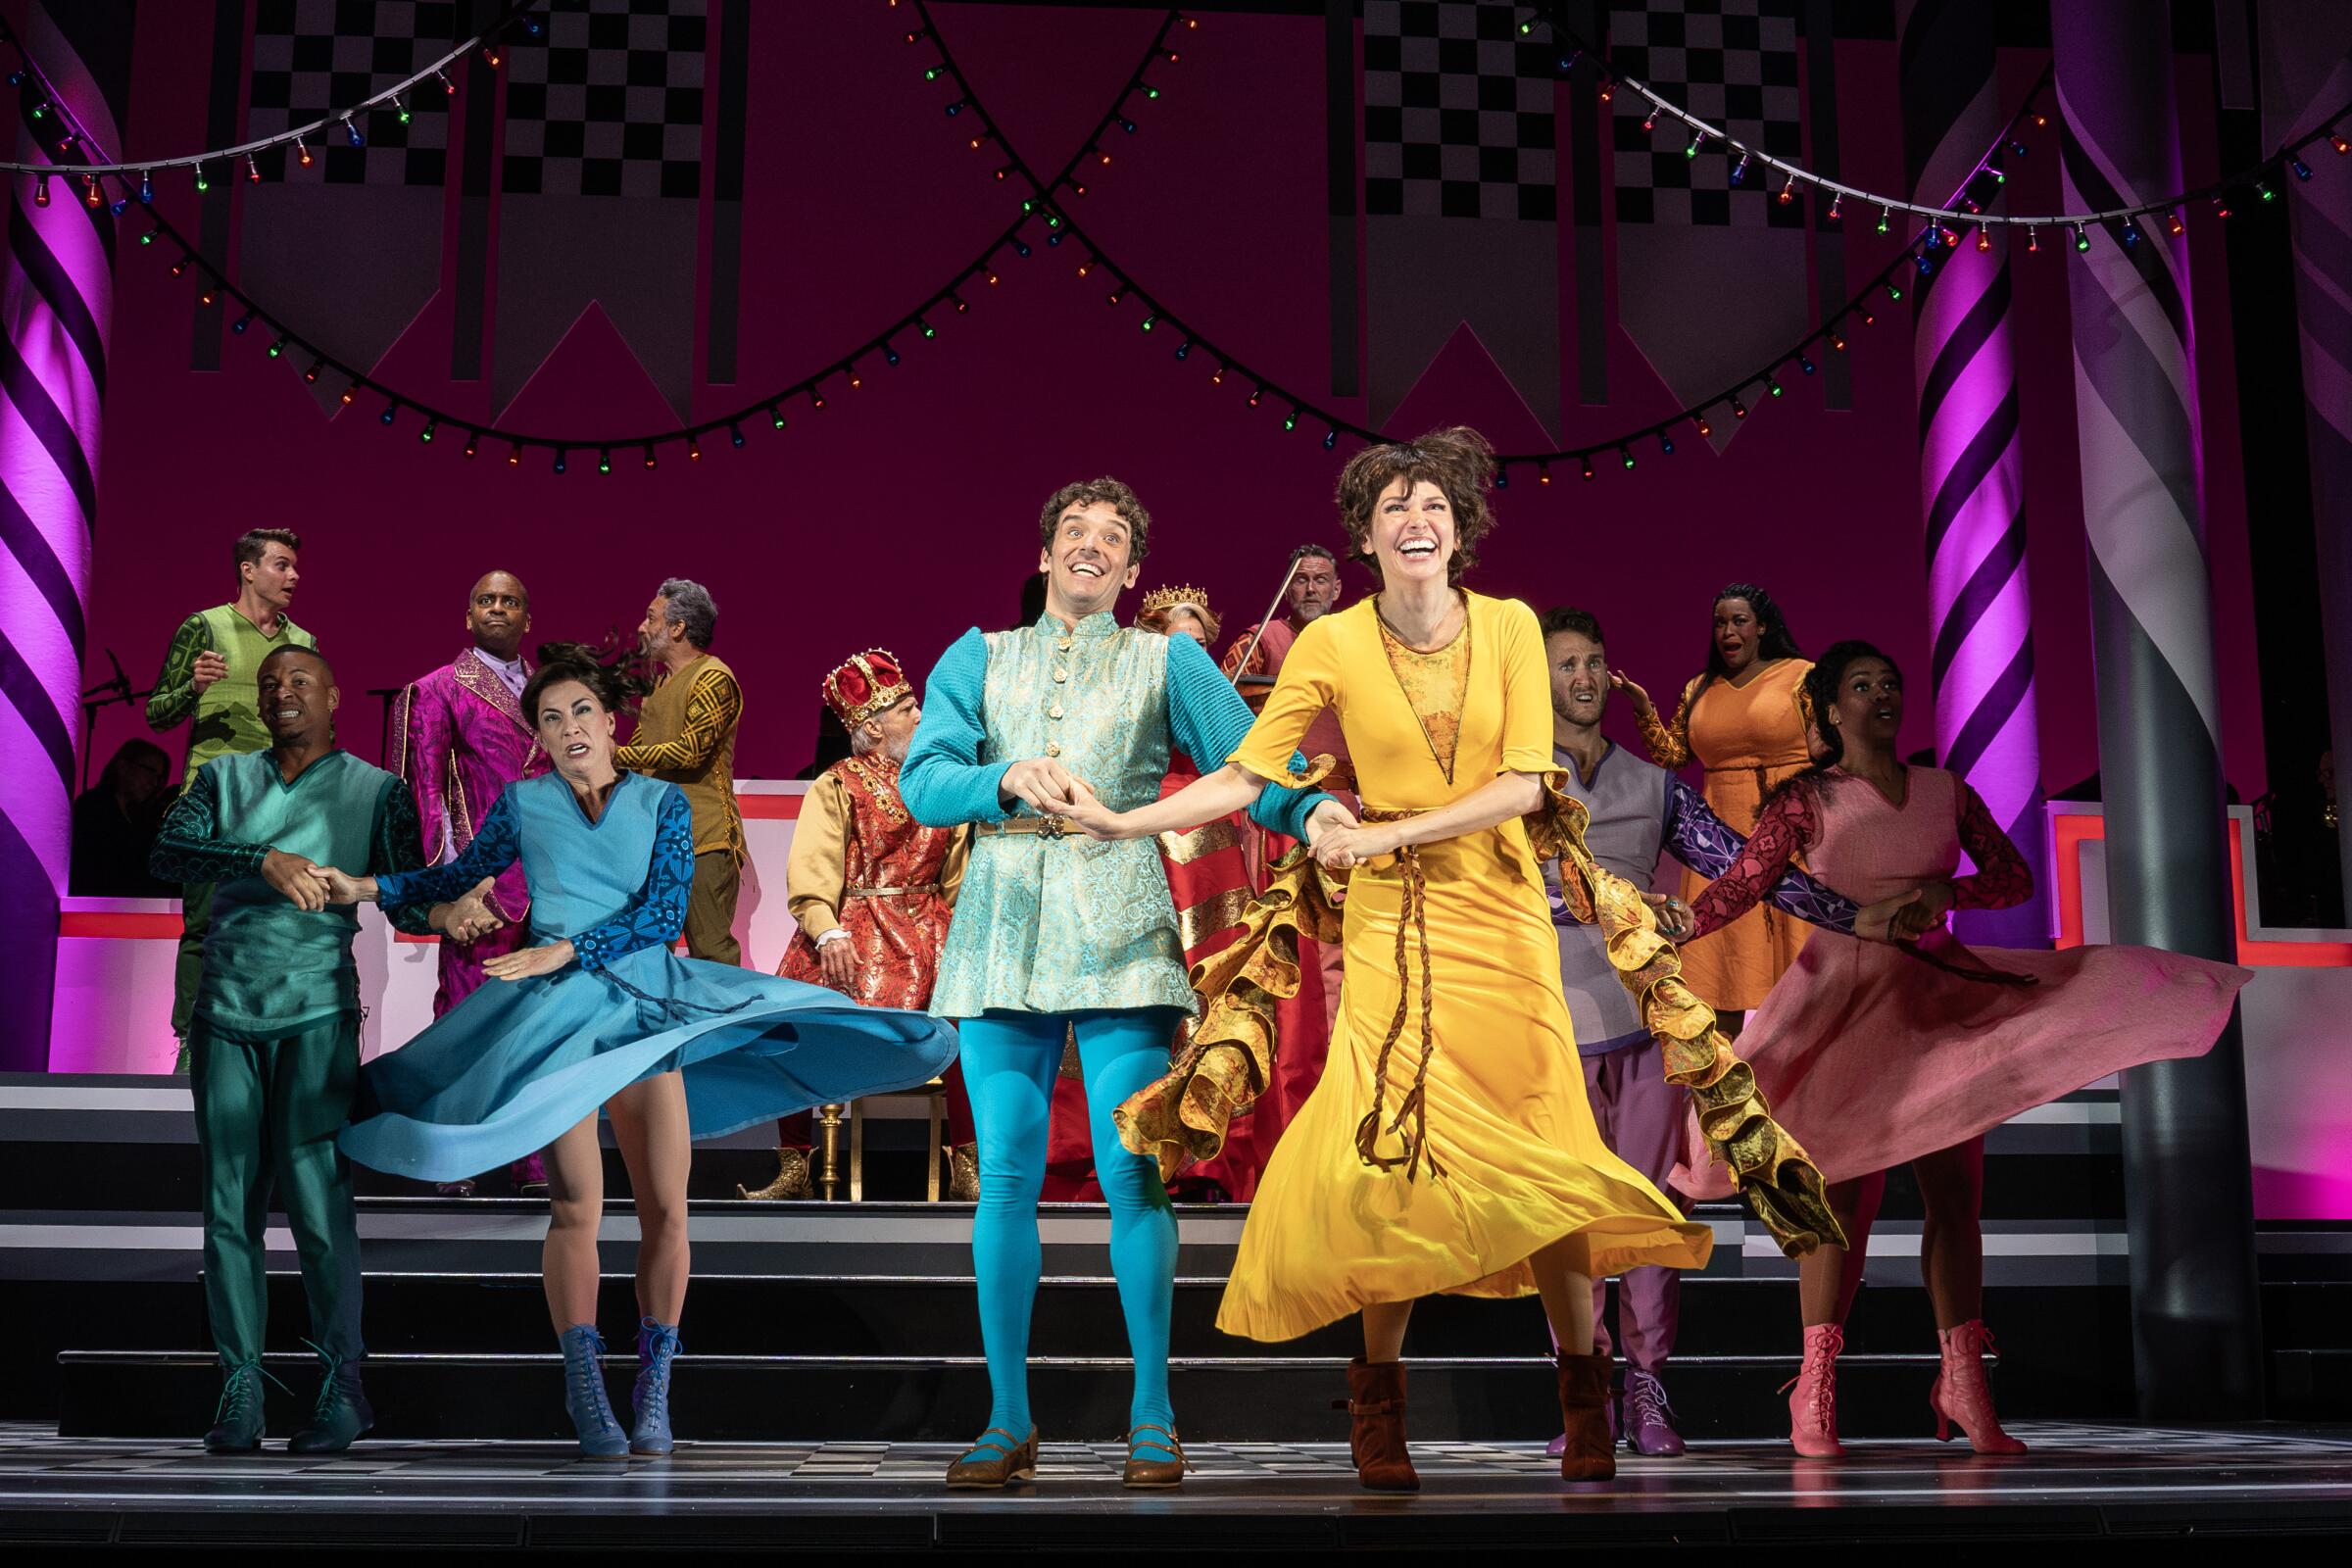 Michael Urie and Sutton Foster with the Broadway cast of "Once Upon a Mattress."